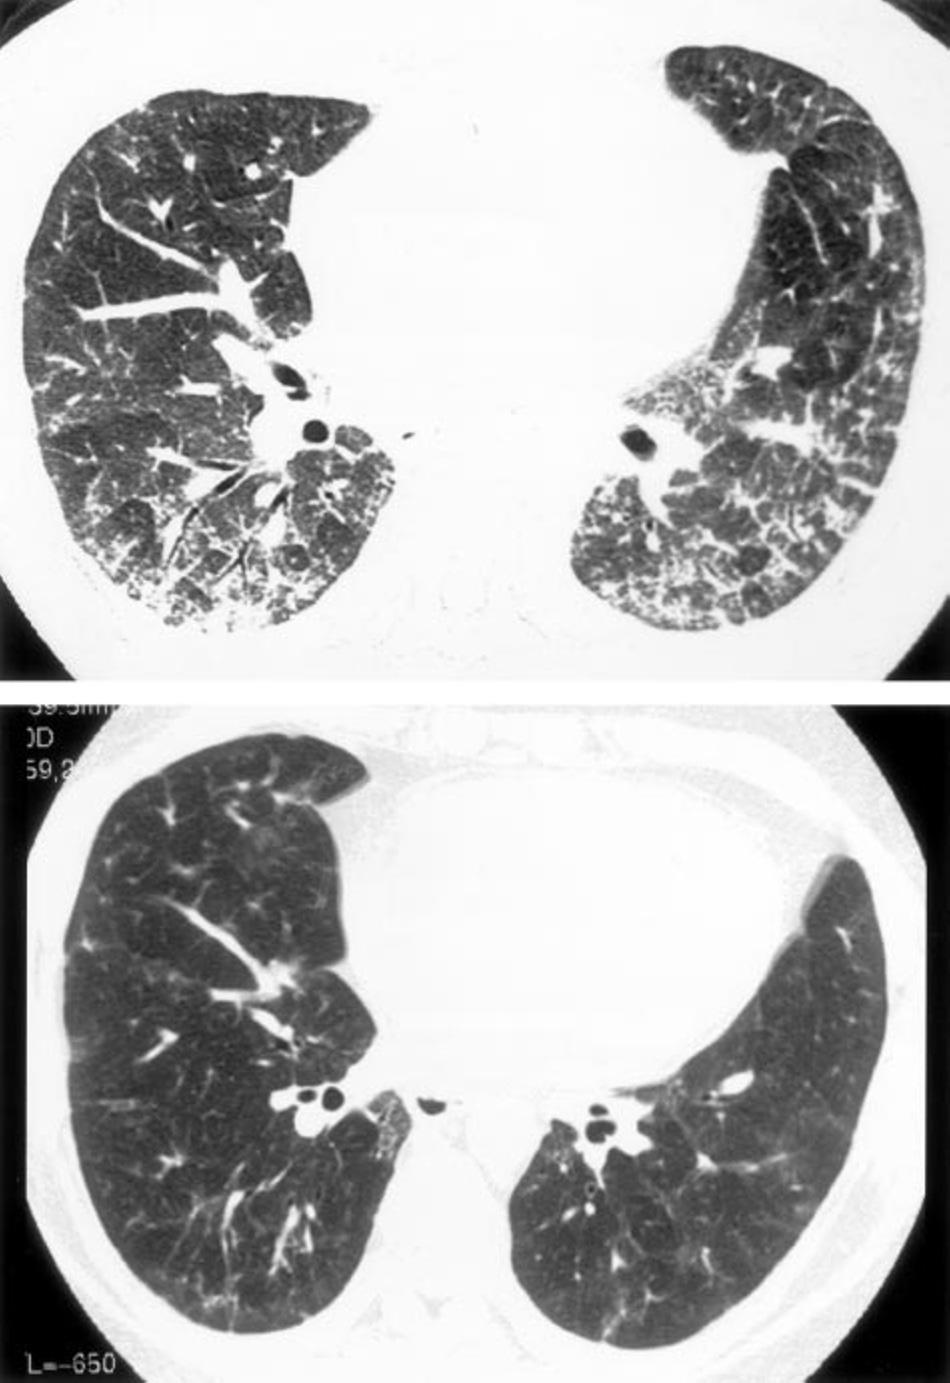 tion) in each zone of each lung and calculated the CT scan score in the same way. CT scan scores were compared between before and after treatments.